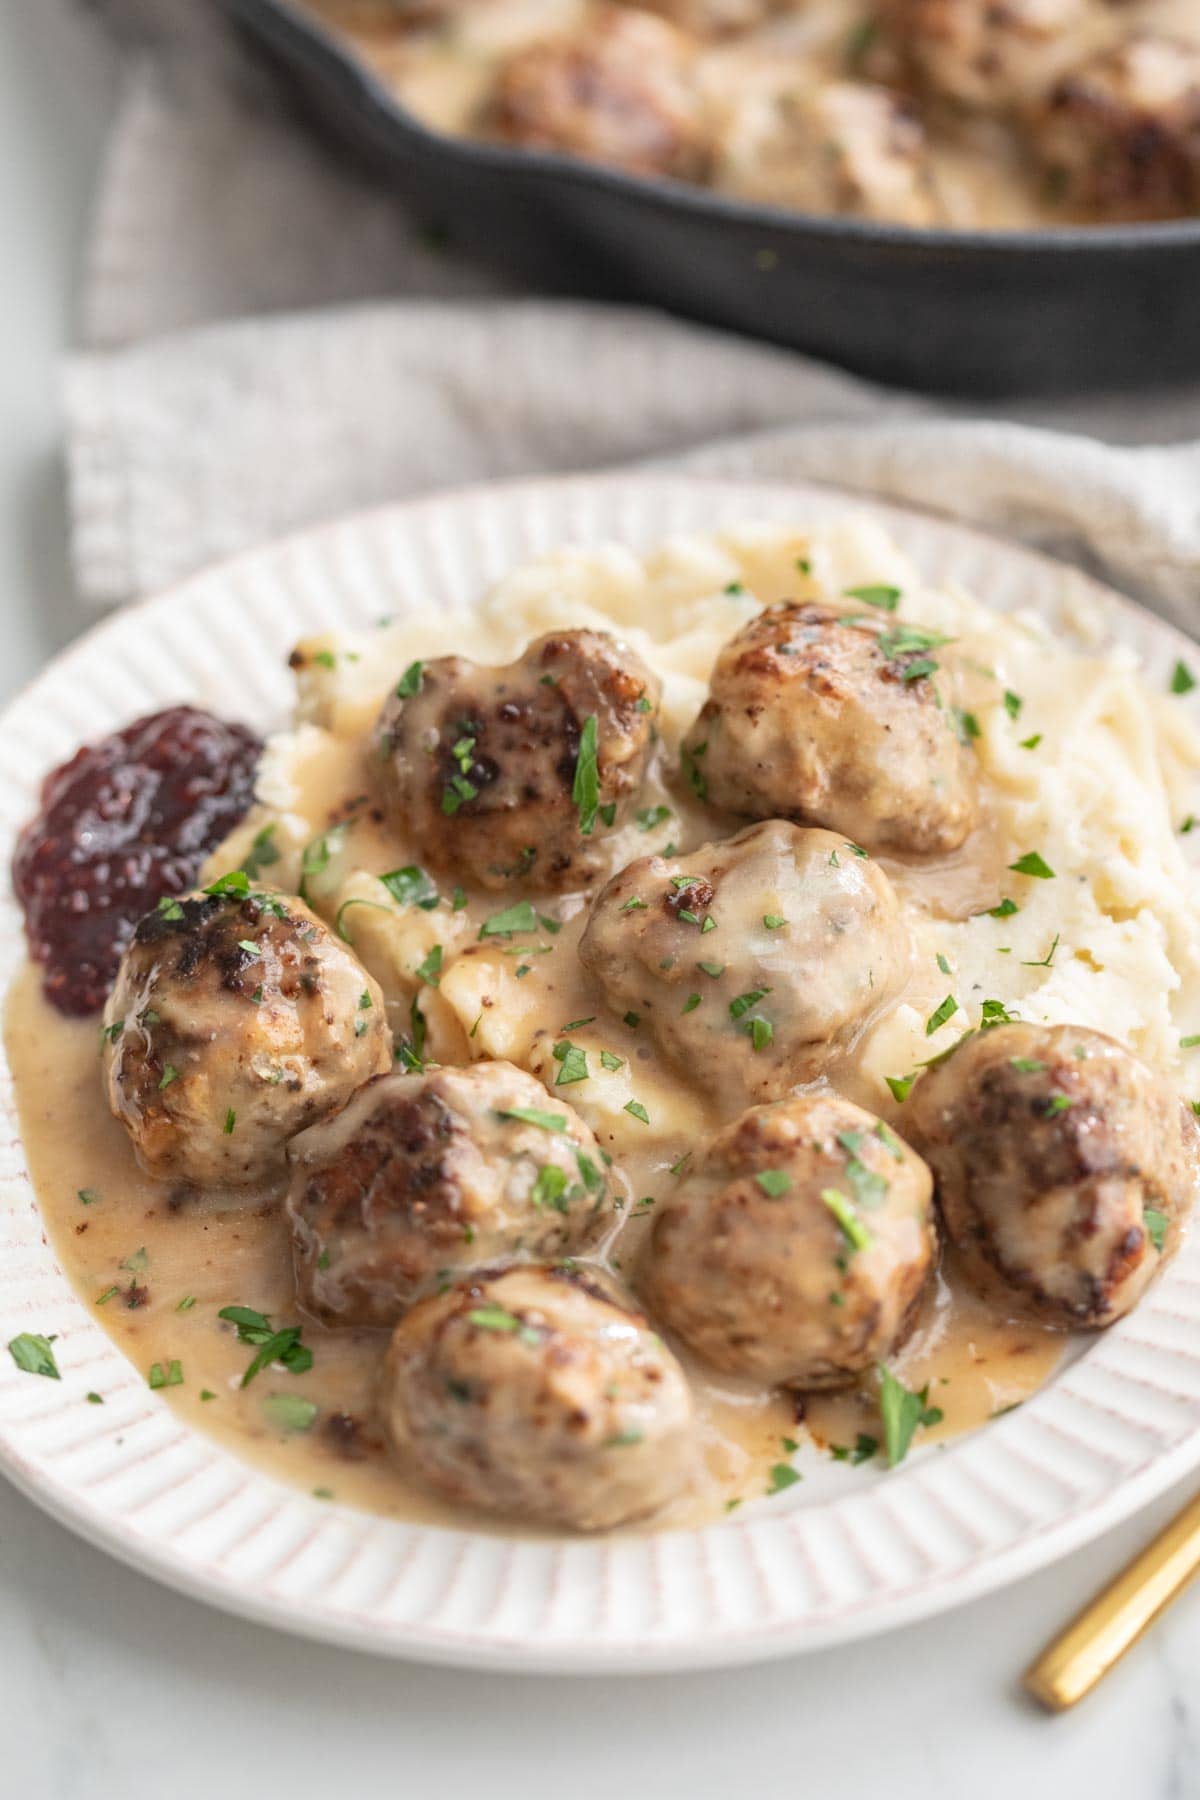 A plate of Whole30 Swedish meatballs and gravy atop a bed of mashed potatoes.